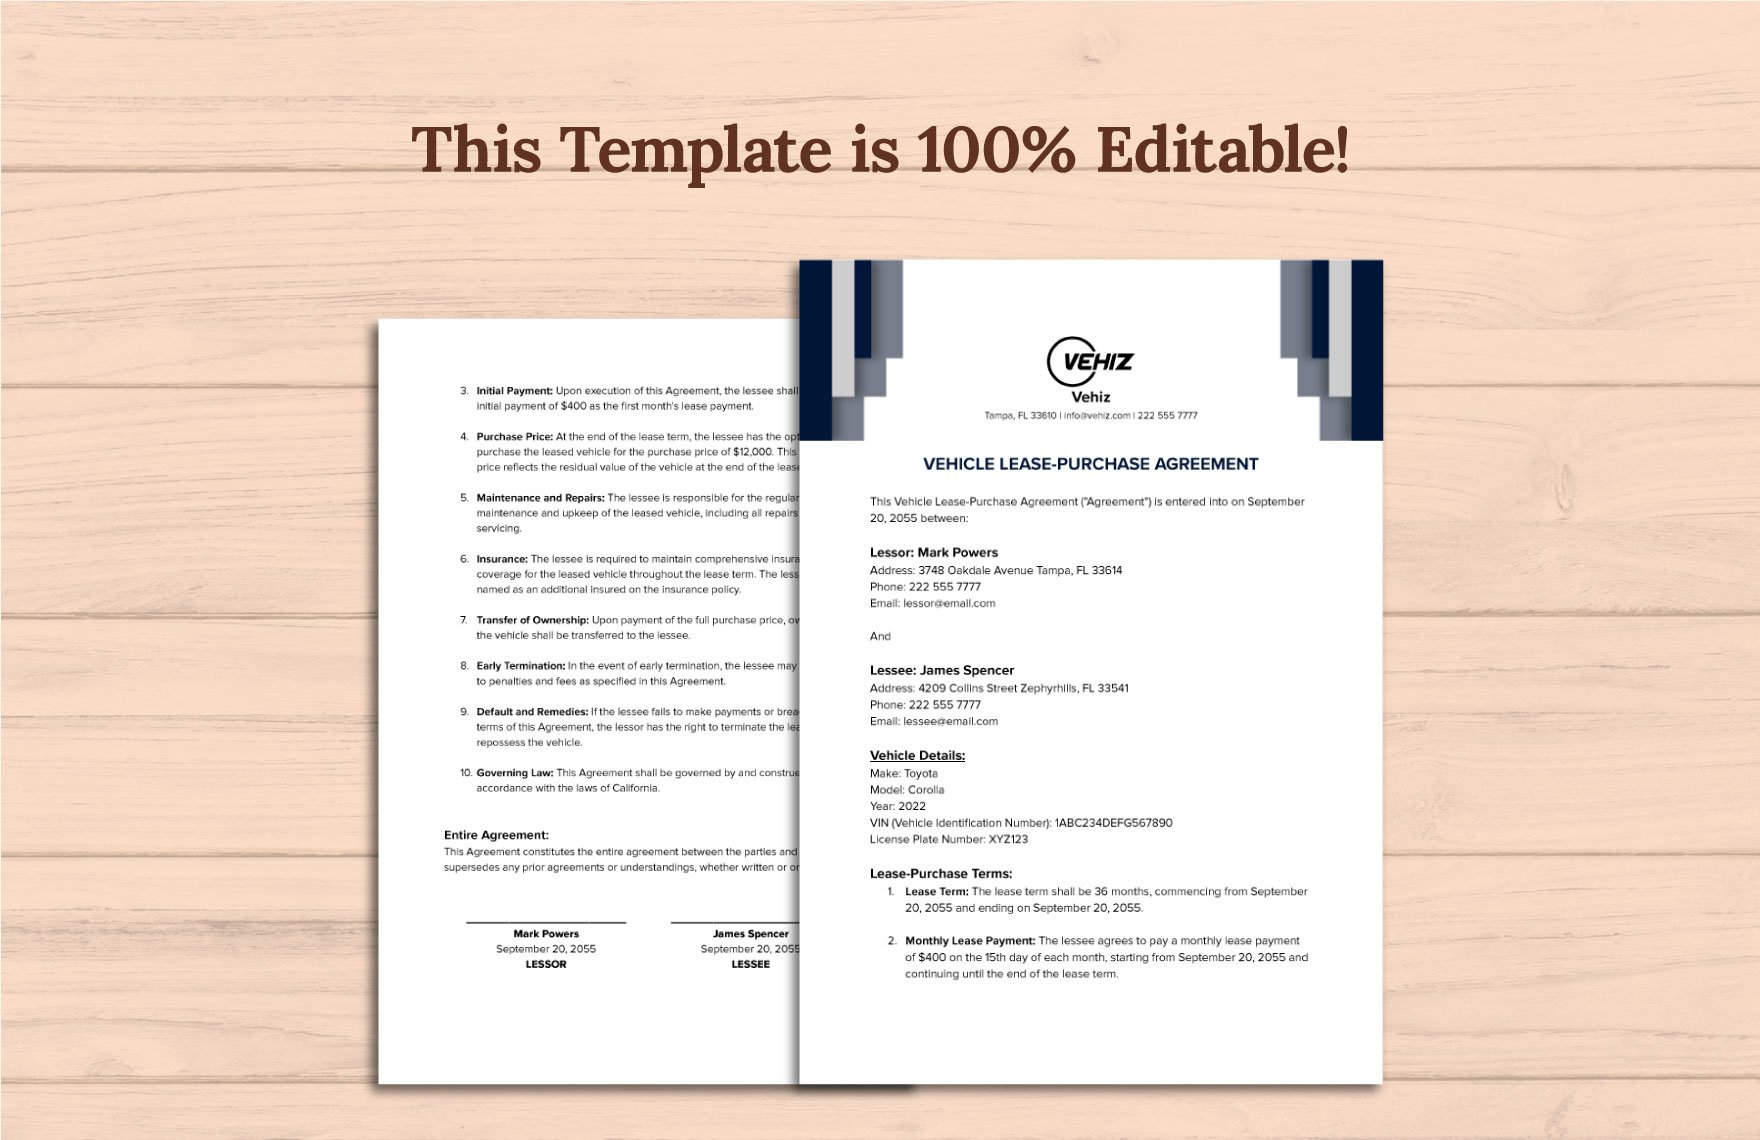 Vehicle Lease-Purchase Agreement Template